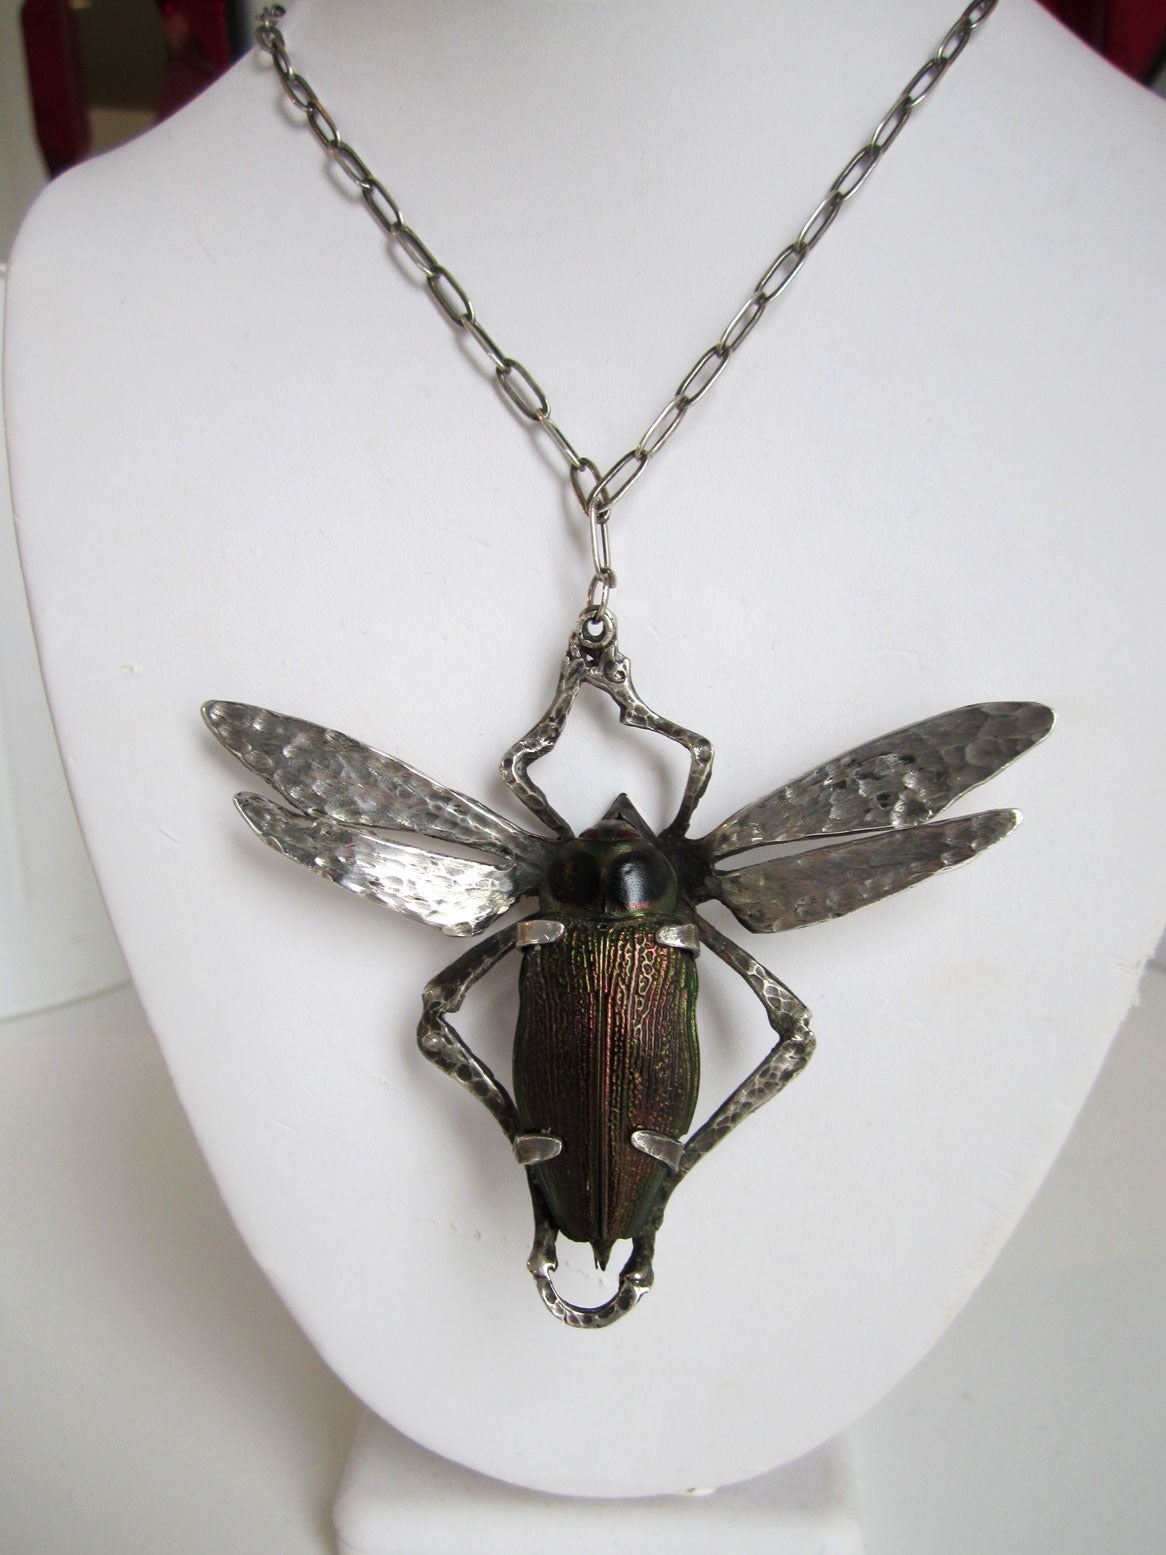 Sterling silver hand-wrought cicada necklace with original chain. A statement necklace with authentic beetle with wonderful iridescence.